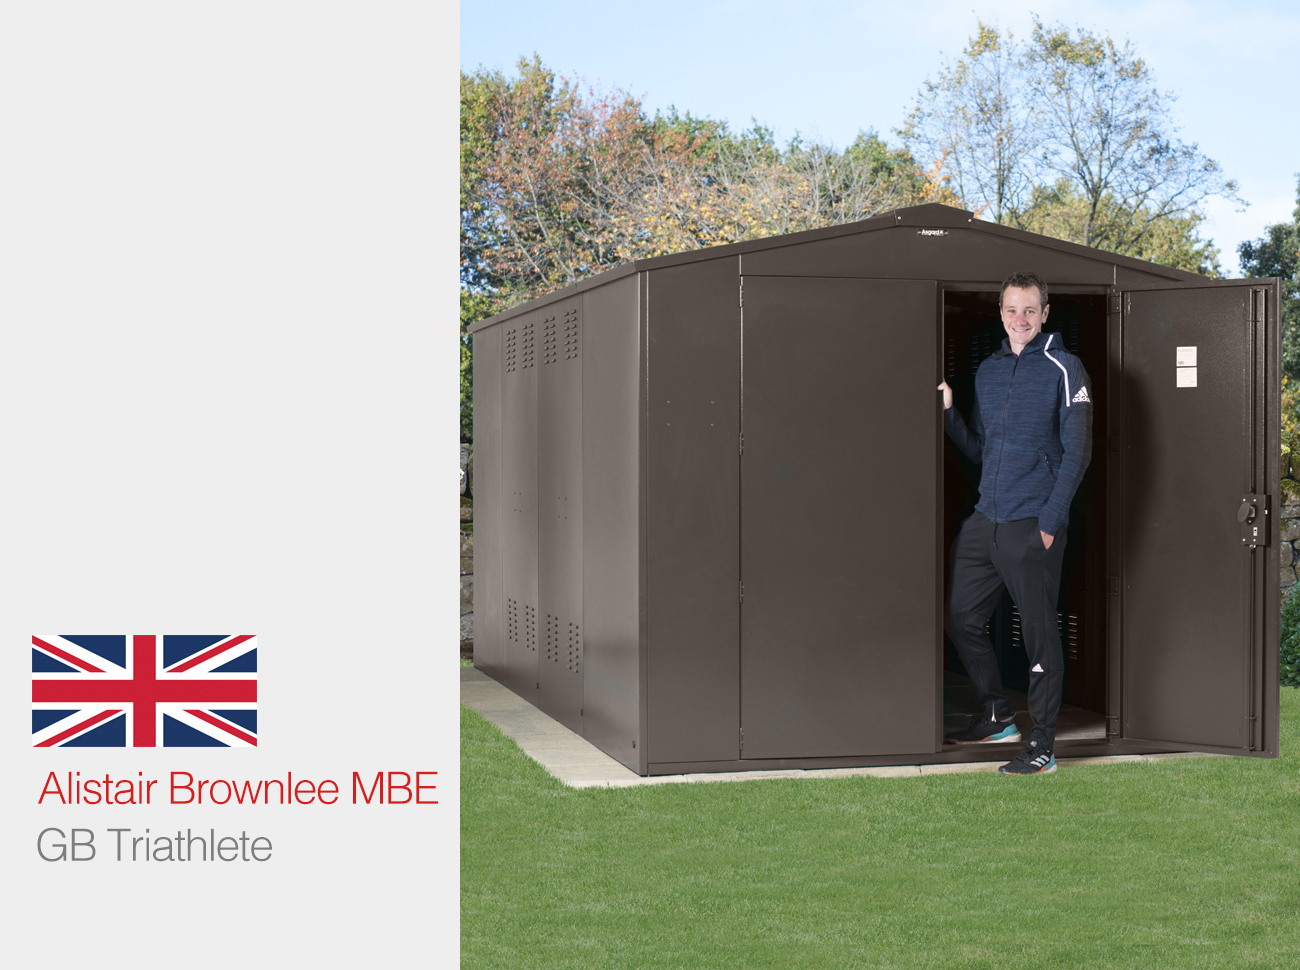 Triathlon Star Alistair Brownlee and his secure bicycle shed